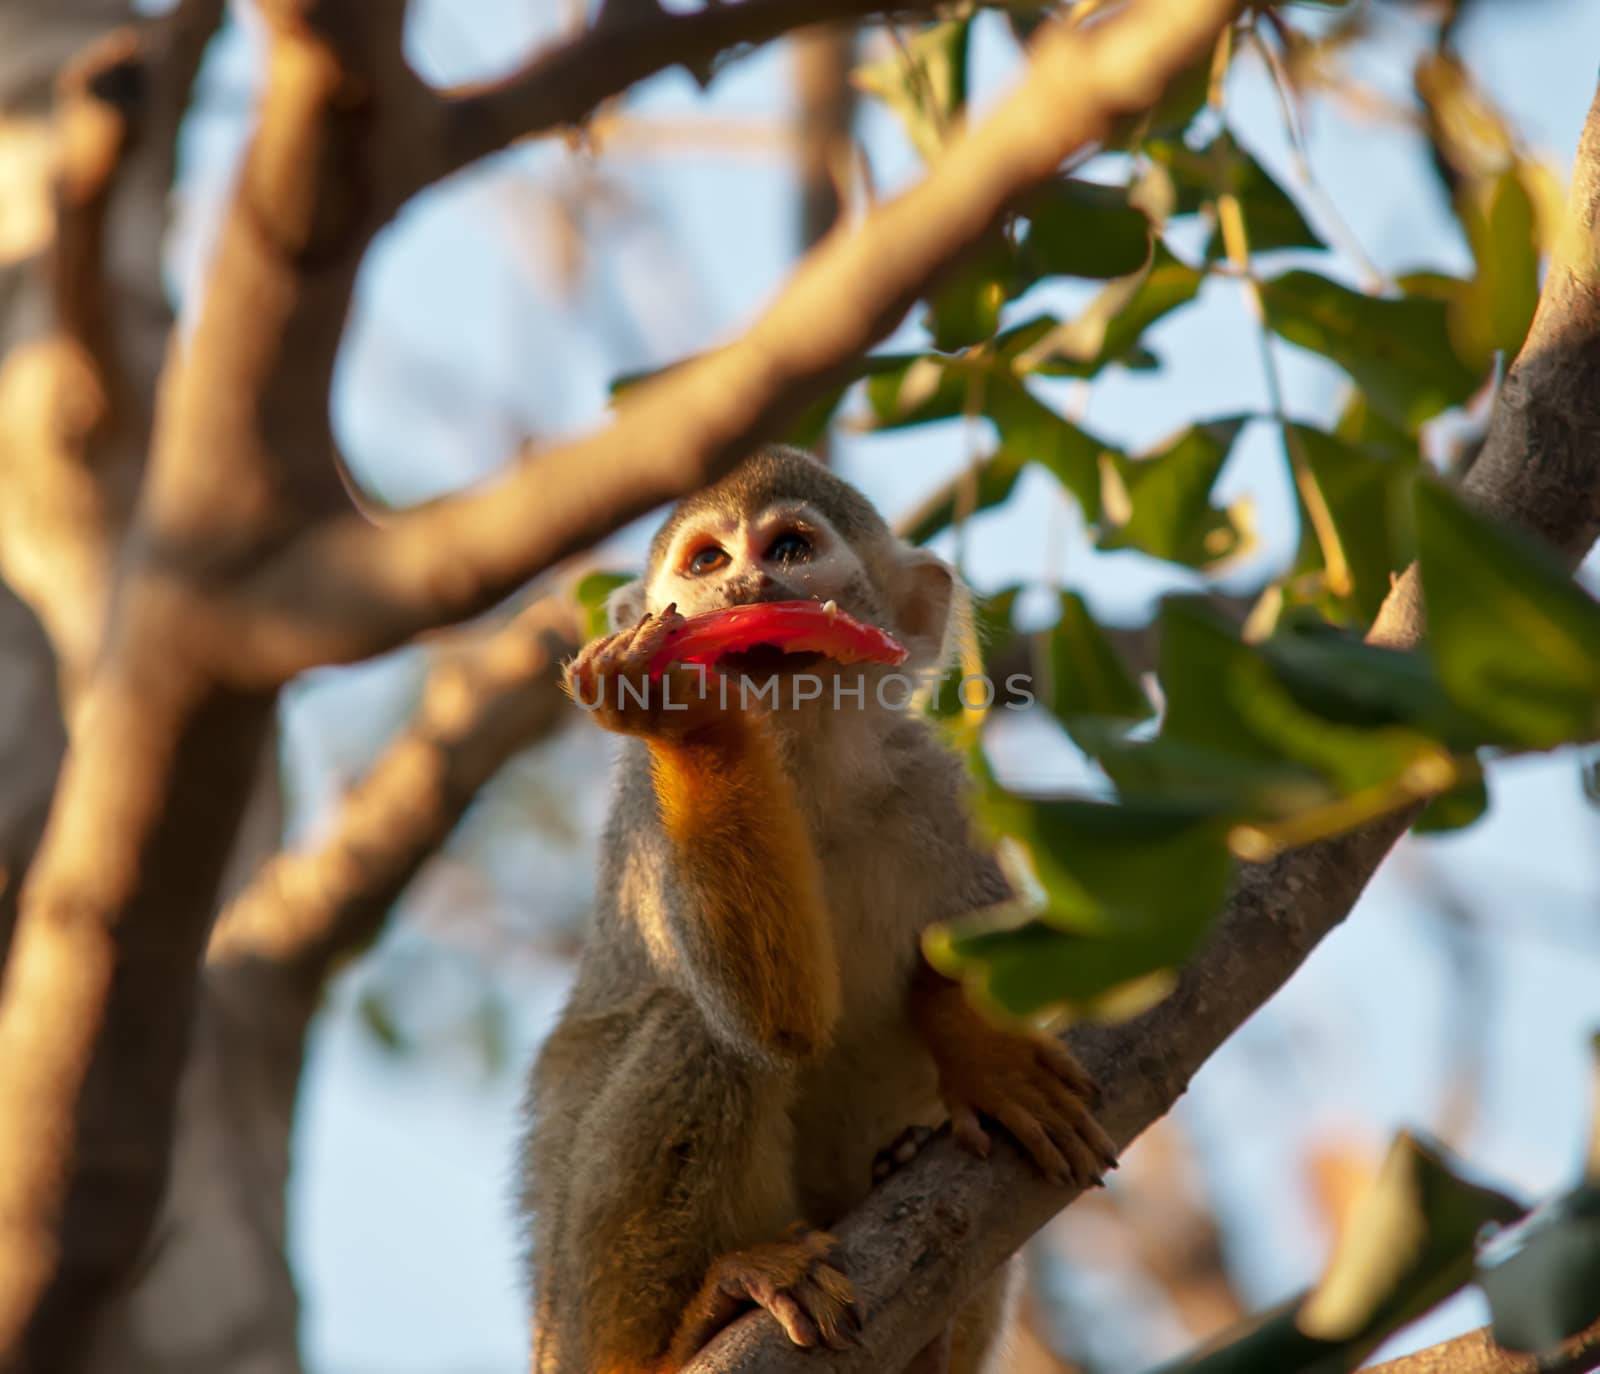 Portrait of a cute squirrel monkey . by LarisaP